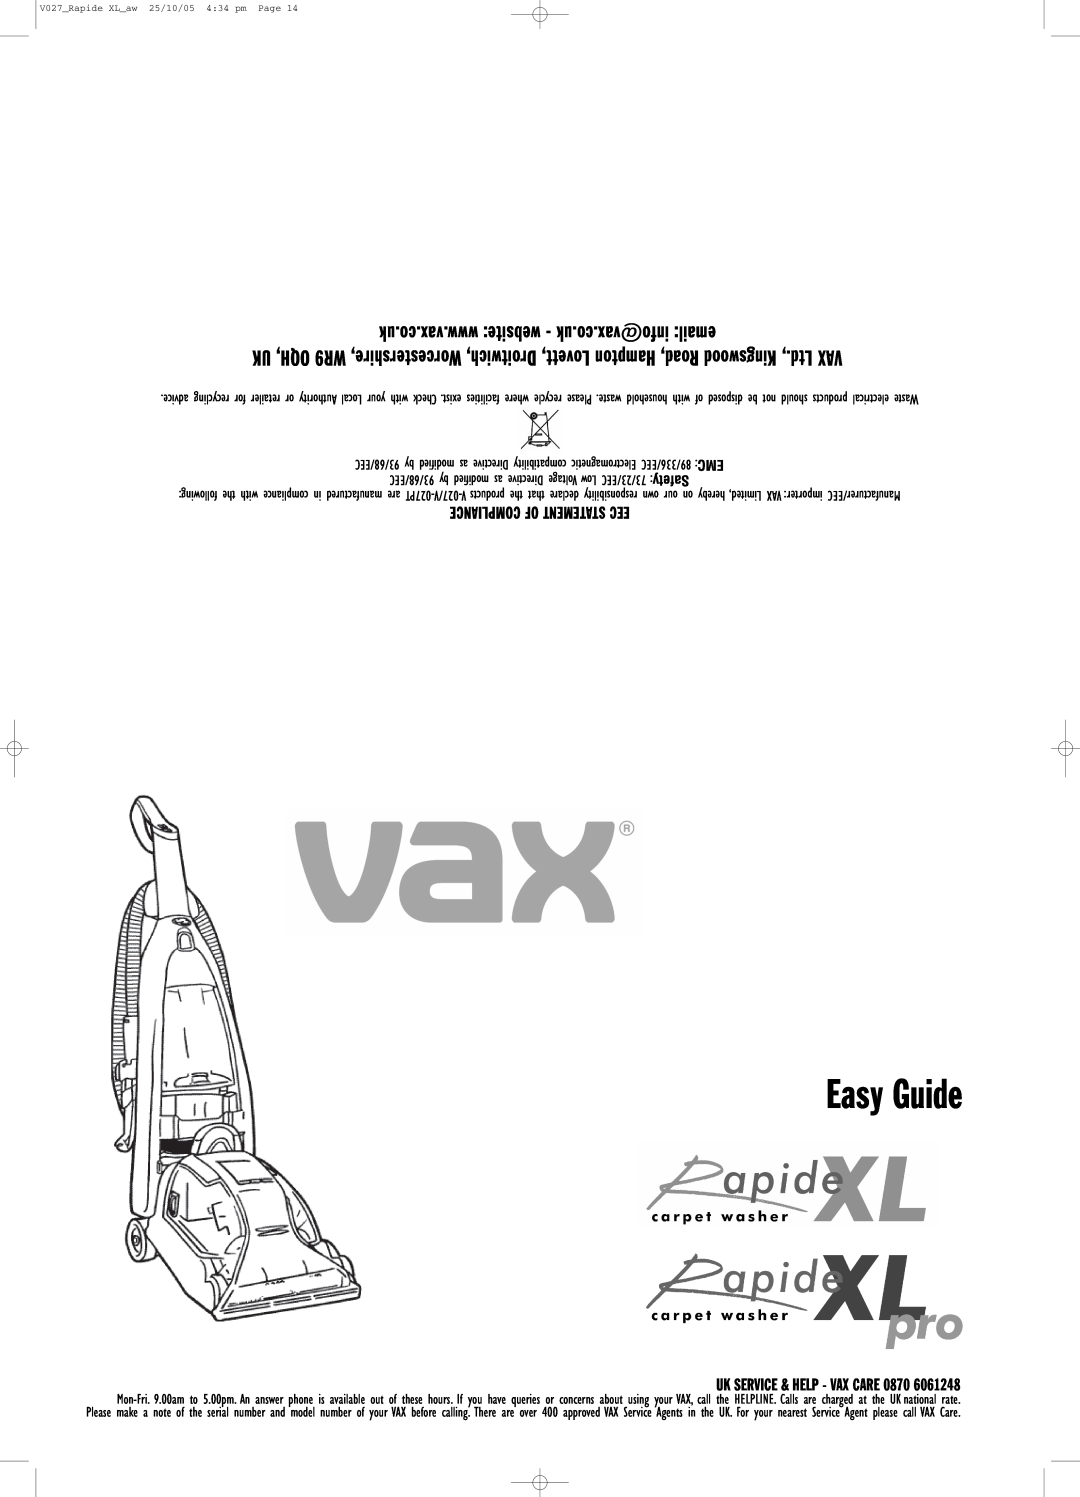 Vax VO27 manual Easy Guide, Uk Service & Help - Vax Care 